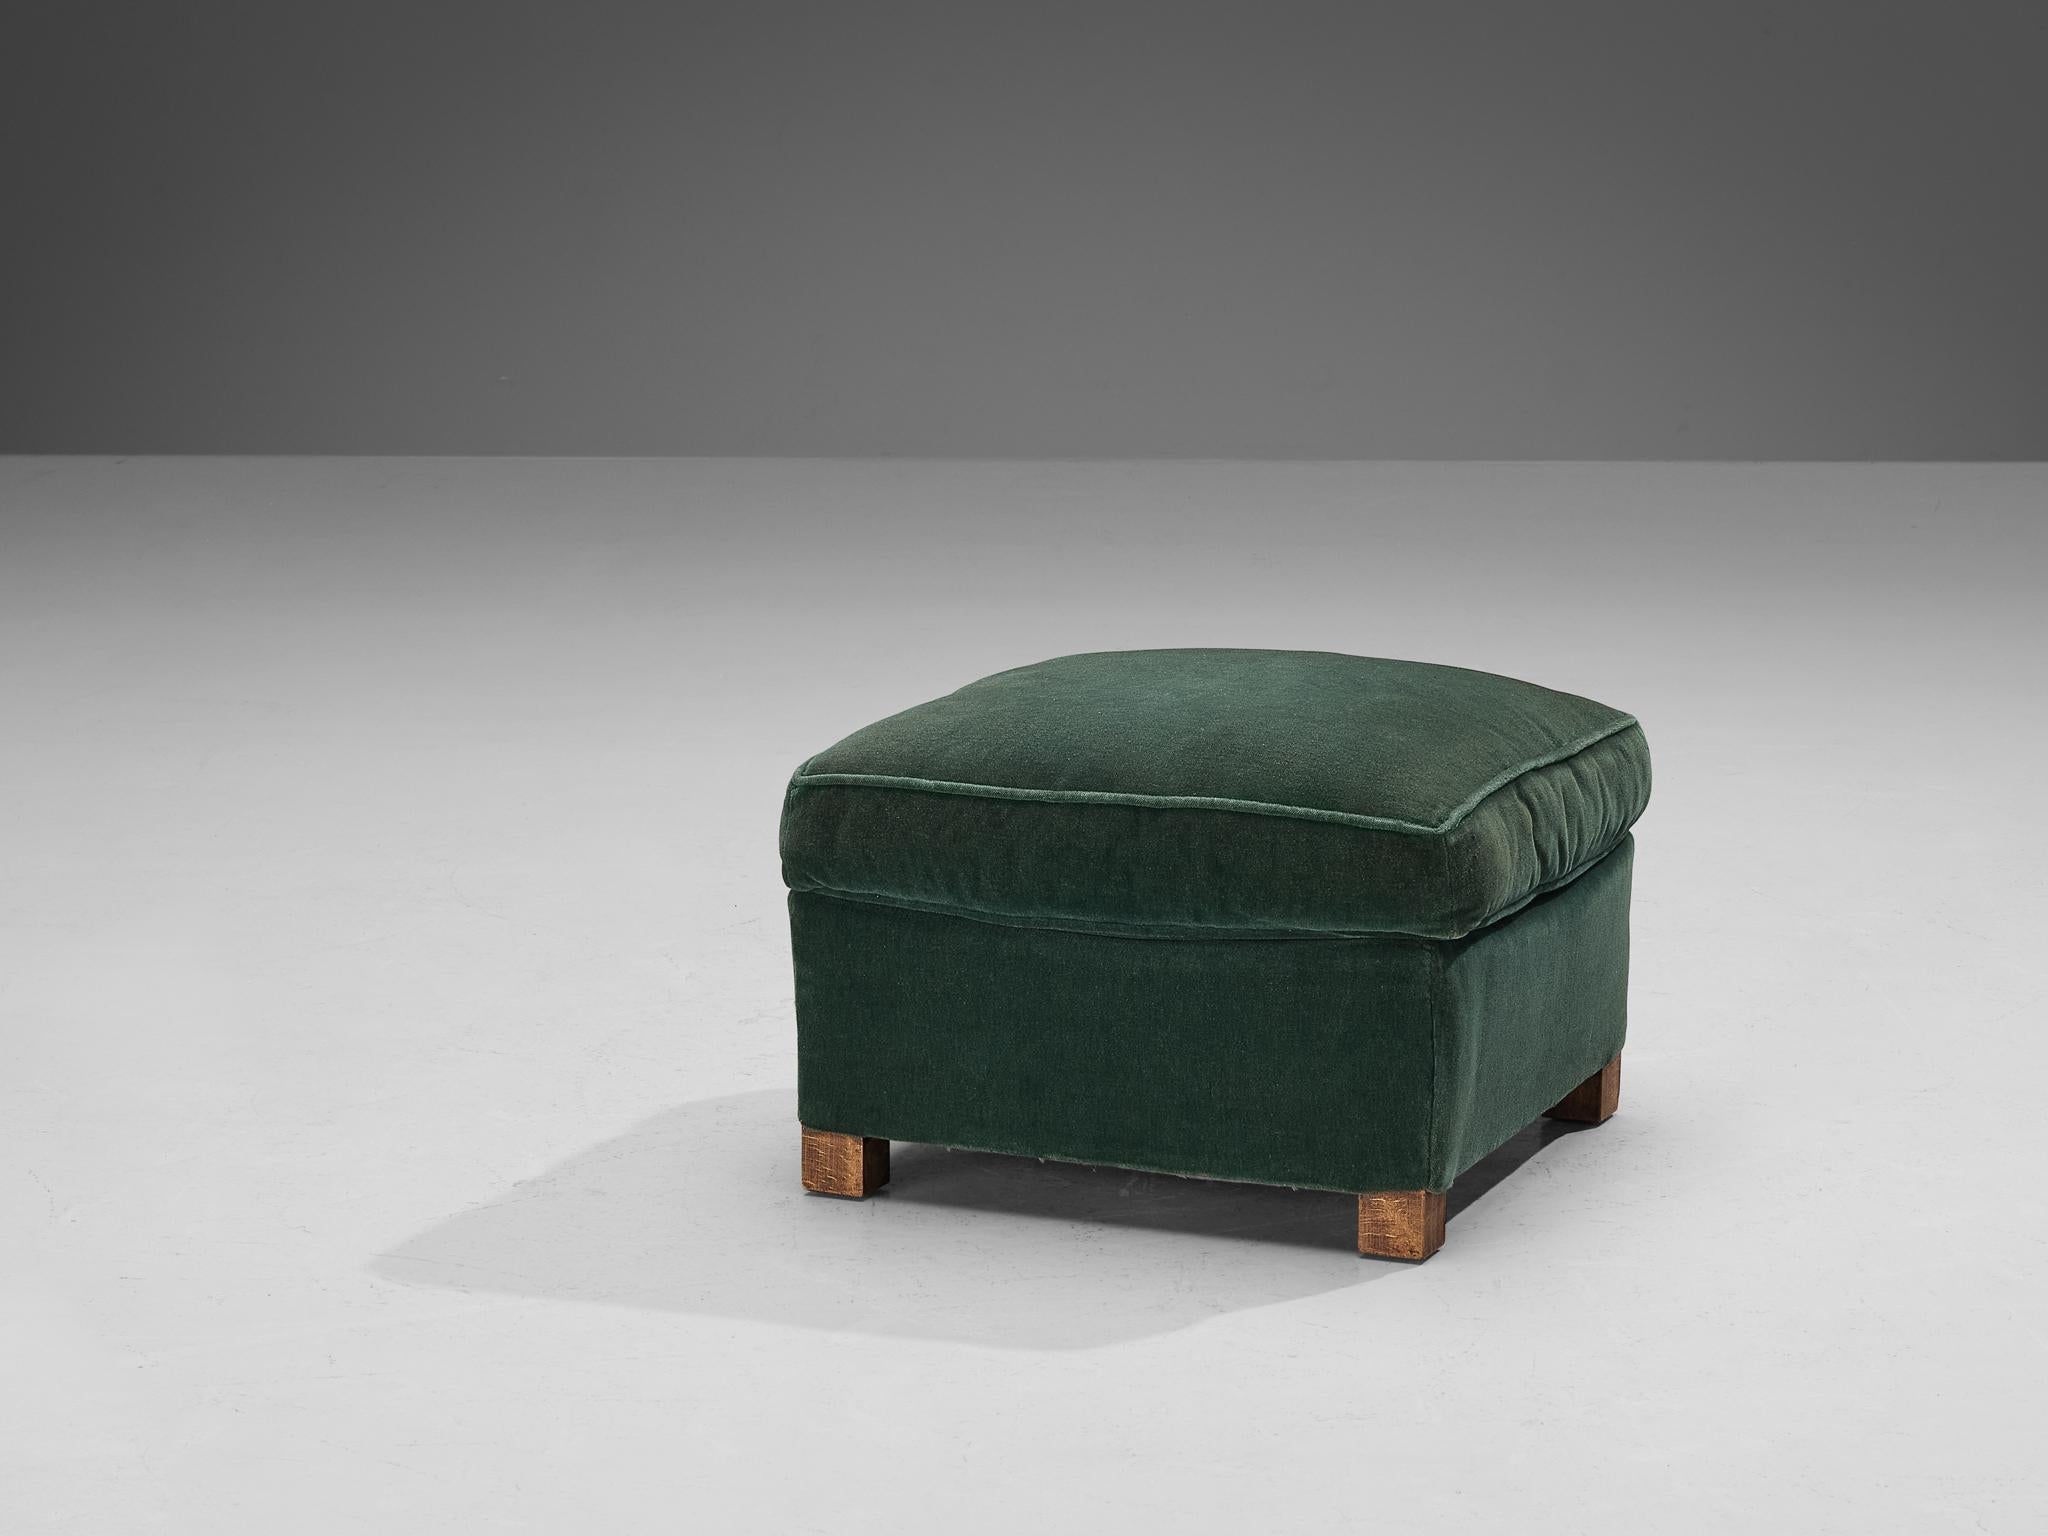 Ottoman or pouf, velvet, beech, Europe, 1940s

Elegant in line and practical to use, this ottoman is exemplary for Art Deco design. A bulky and voluminous seat upholstered in a fine green velvet is accompanied by four short legs in wood. This